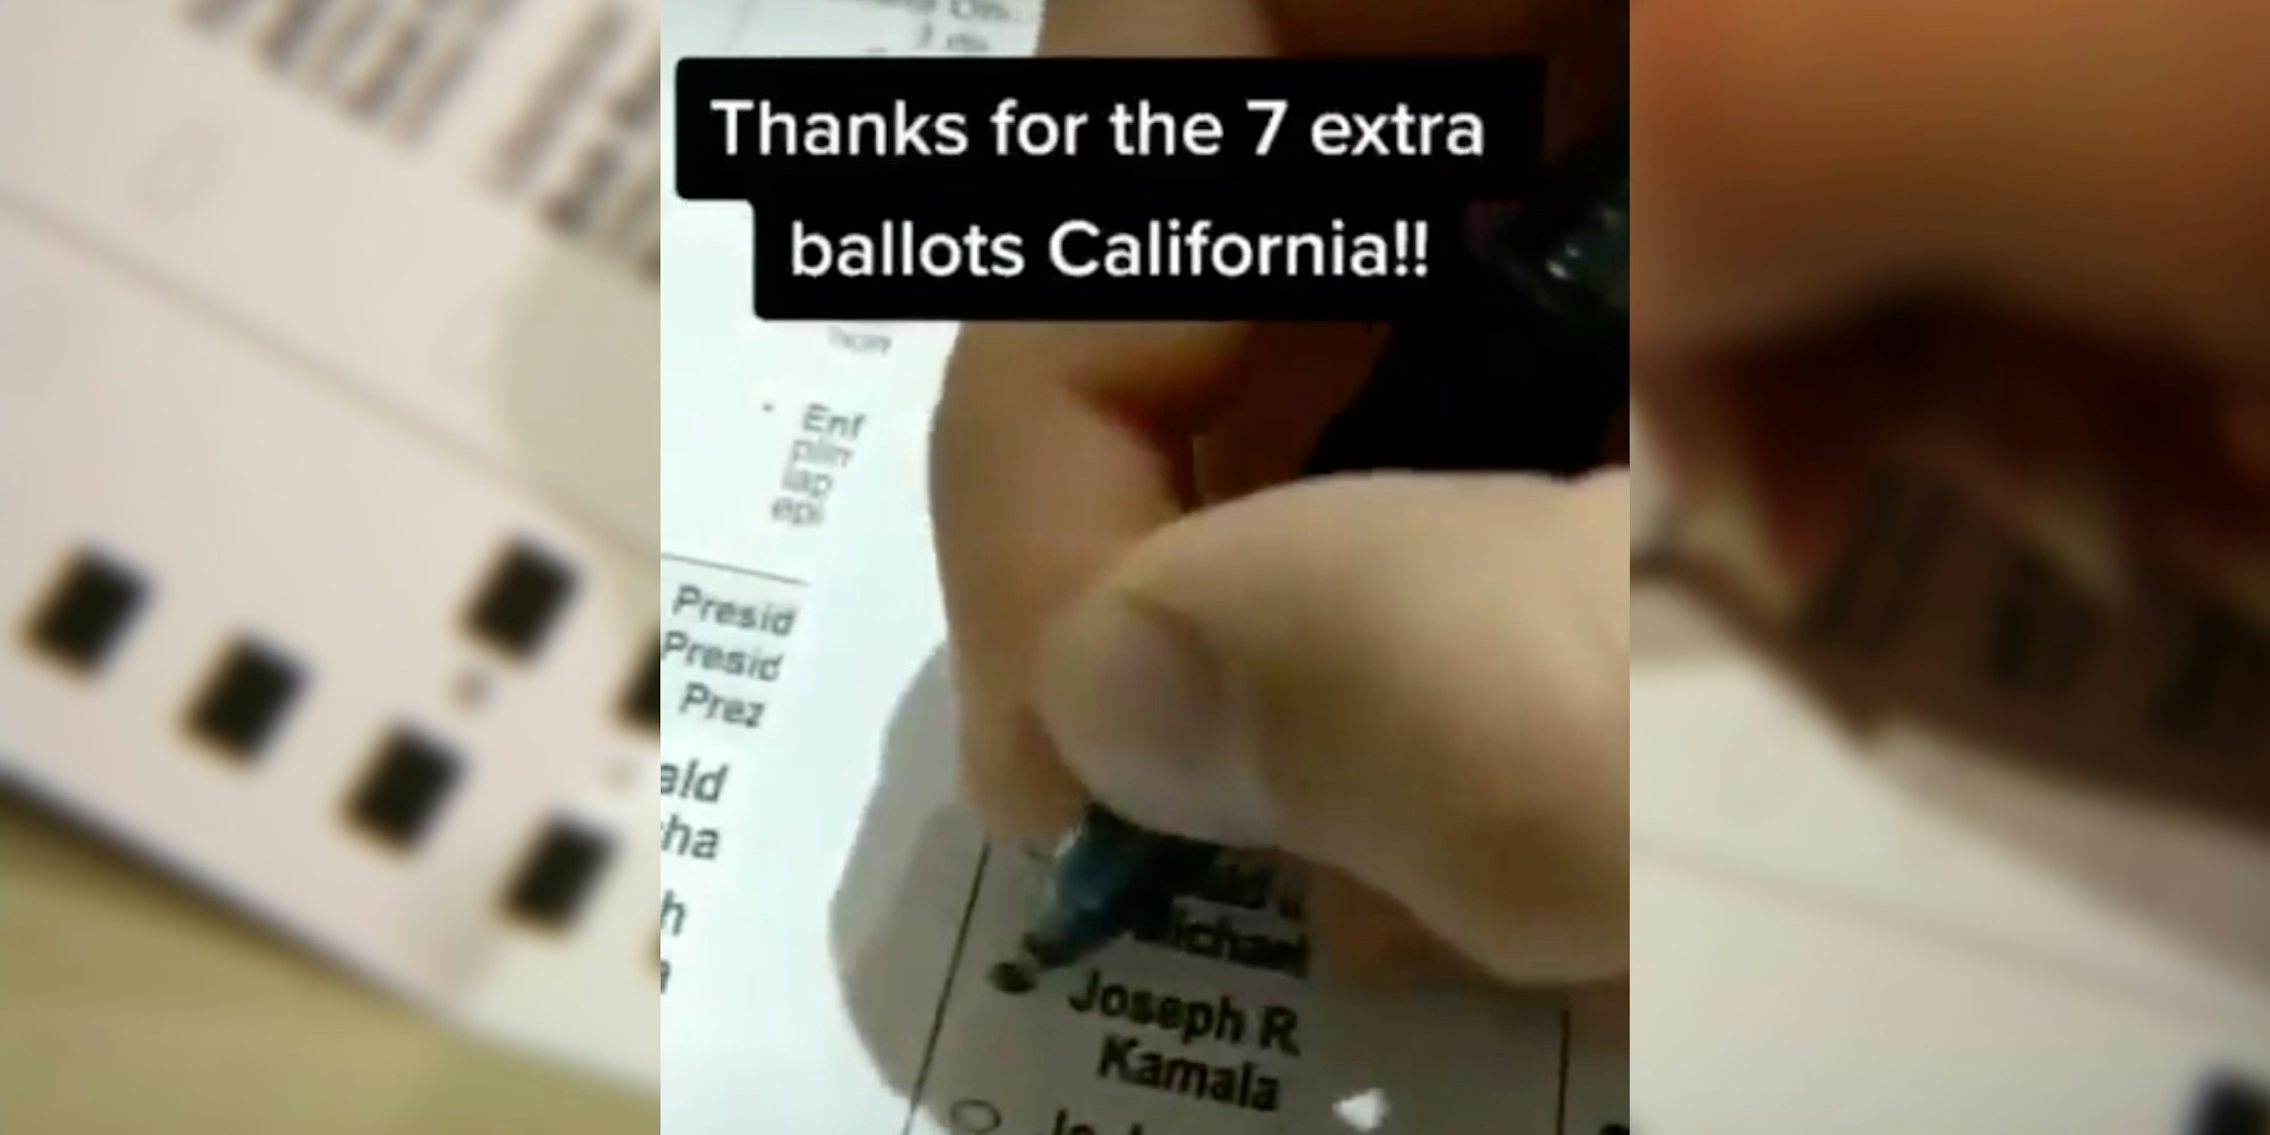 A TikTok video of someone filling out ballots